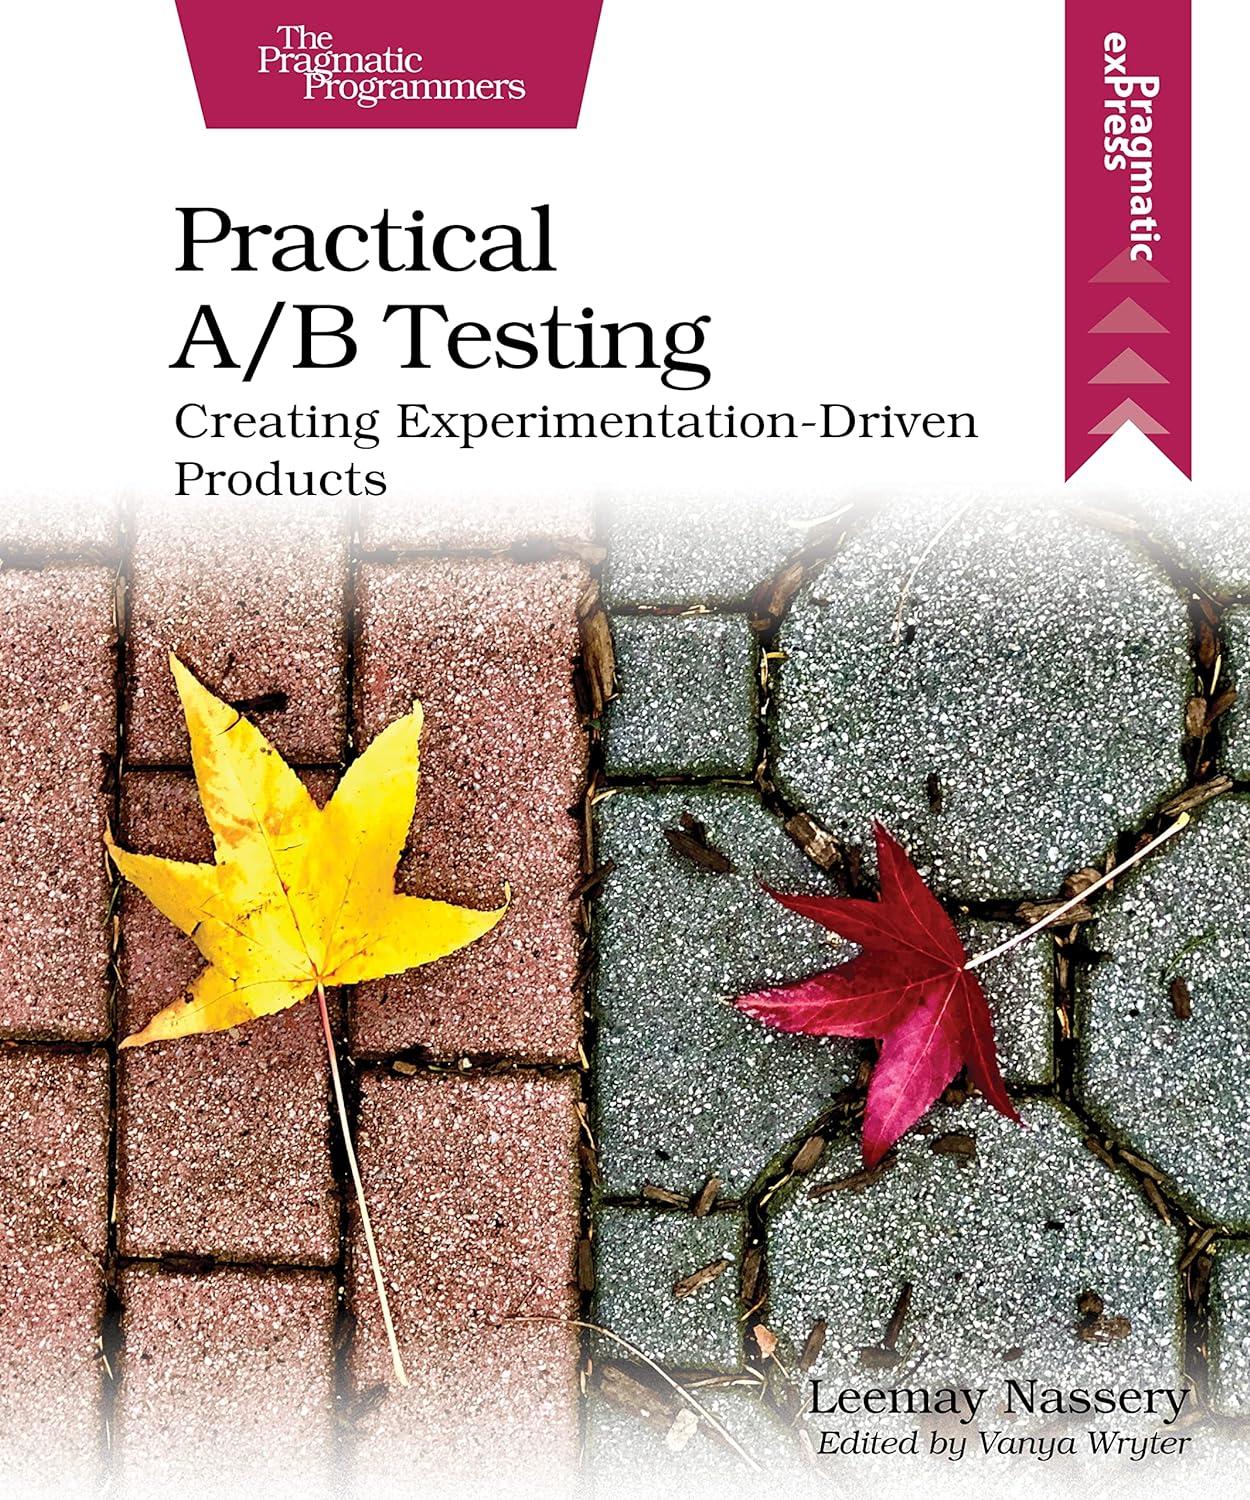 practical a/b testing creating experimentation driven products 1st edition leemay nassery ? b0c61k13wy,